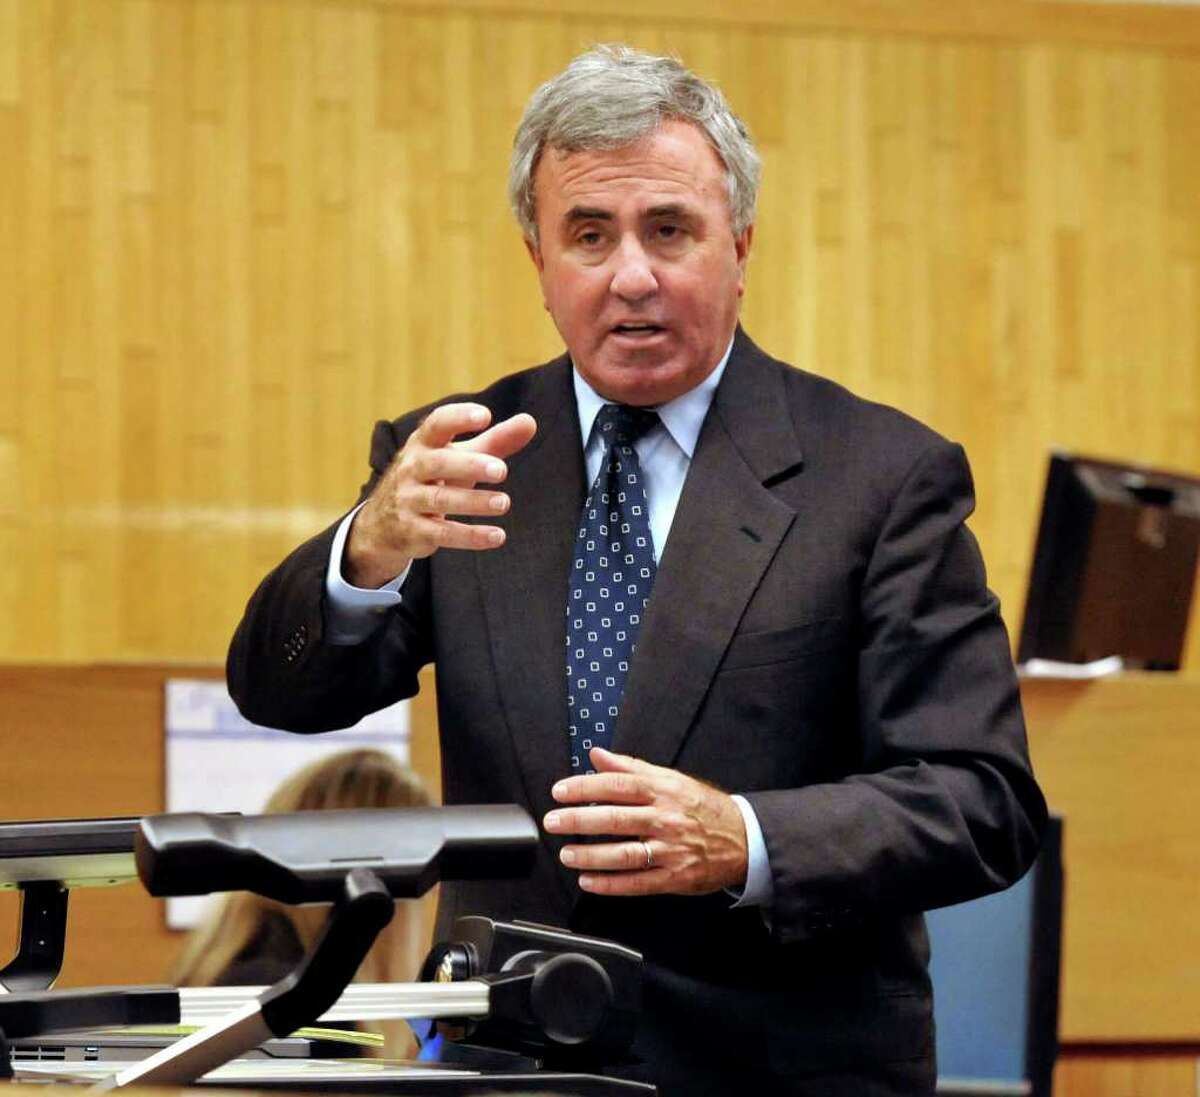 Defense Attorney Mickey Sherman makes his opening statement in the courtroom at Danbury Superior Court in the murder trial of Marash Gojcaj, Wednesday, Sept. 29, 2010.